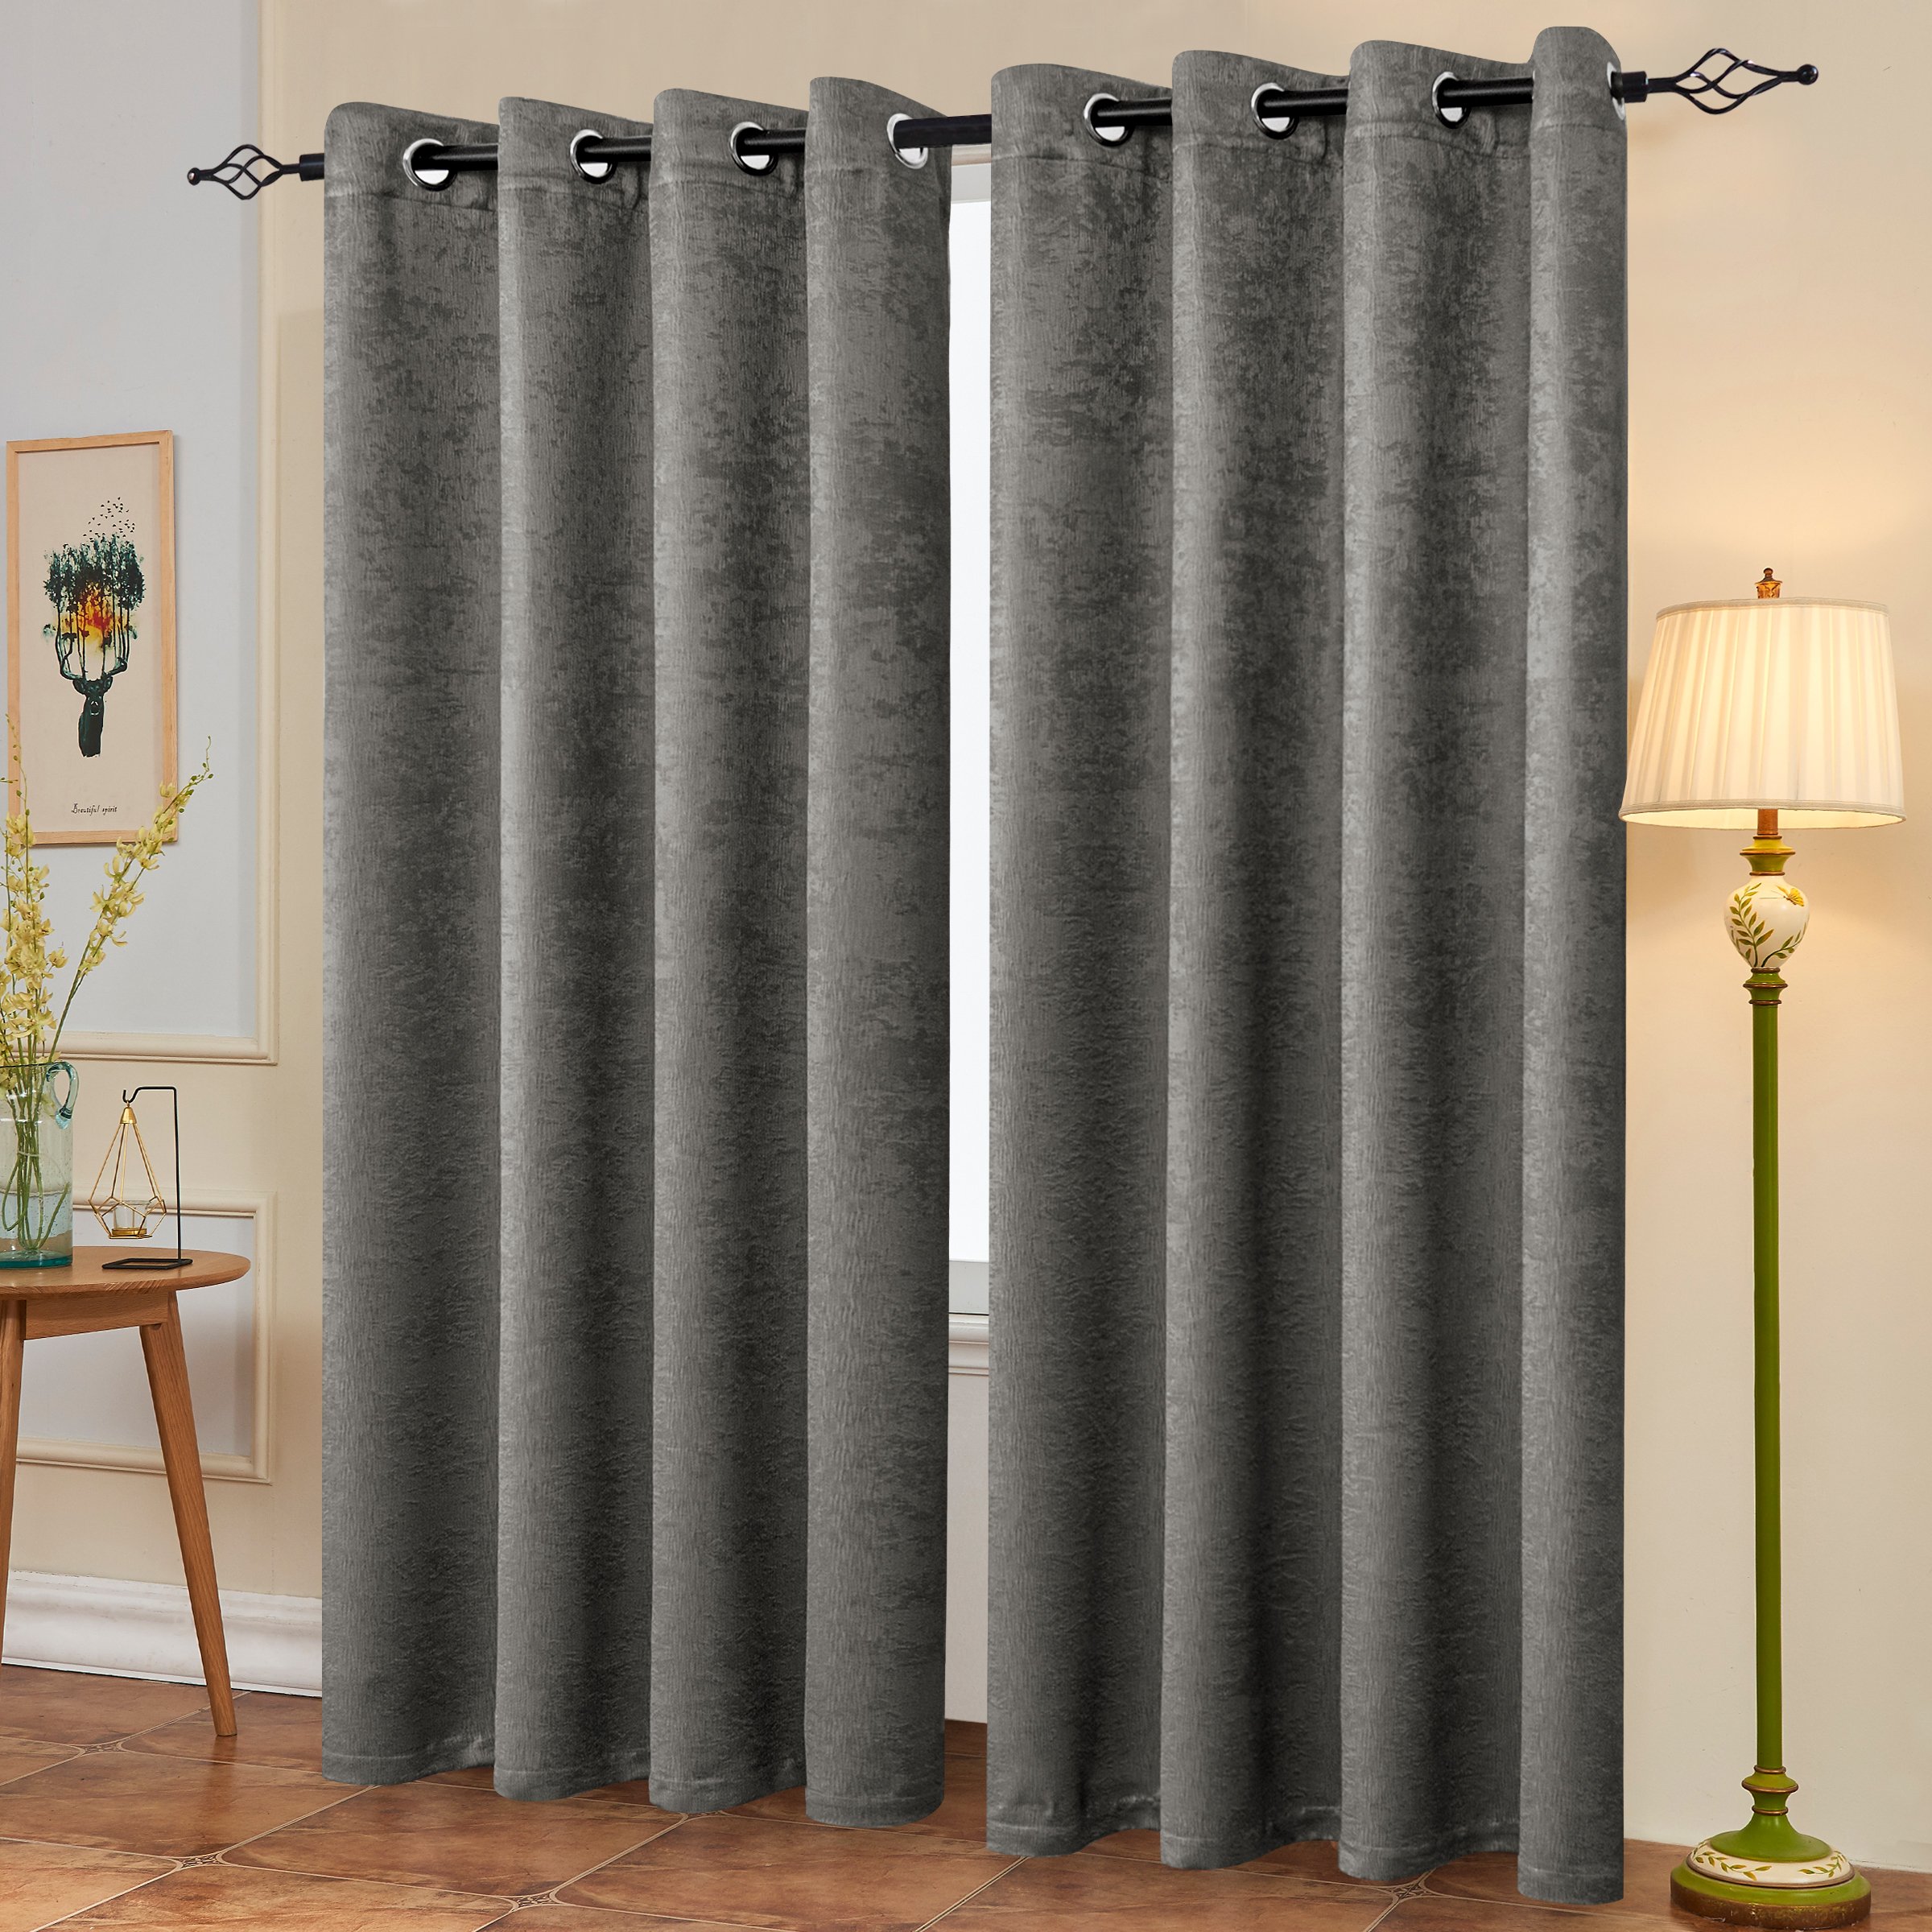 Subrtex Thermal Insulated Grommet Blackout Curtains for Bedroom, Set of 2 Panels, 53"×96", Dark Grey - image 5 of 5